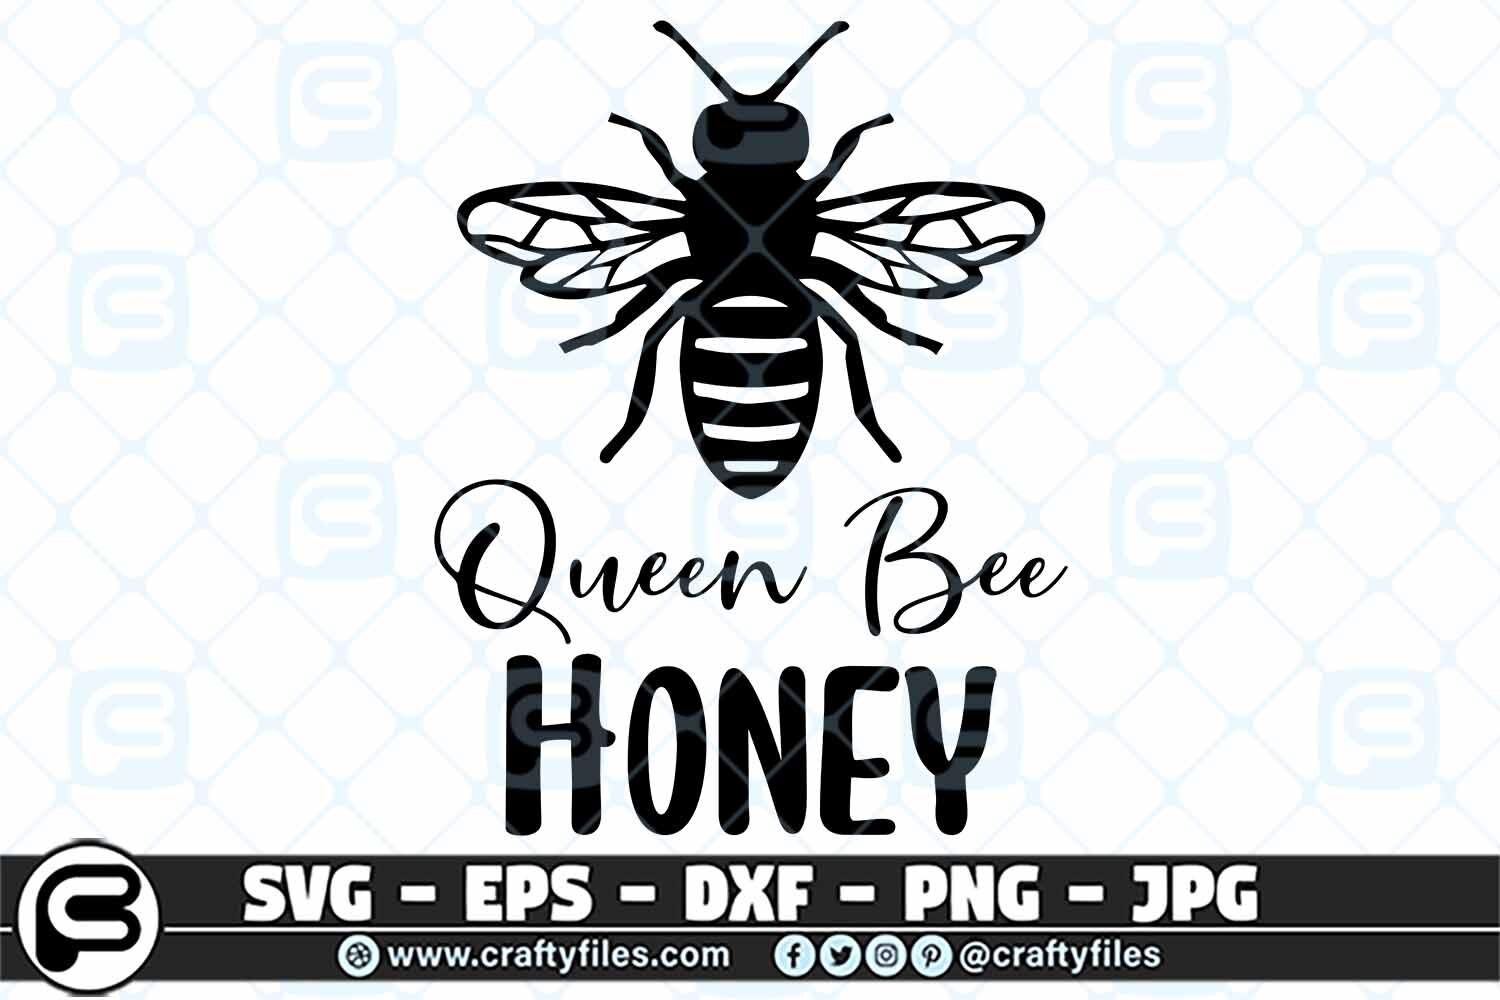 Queen Bee Honey Svg Cut File Bee Svg Honey Svg By Crafty Files Thehungryjpeg Com